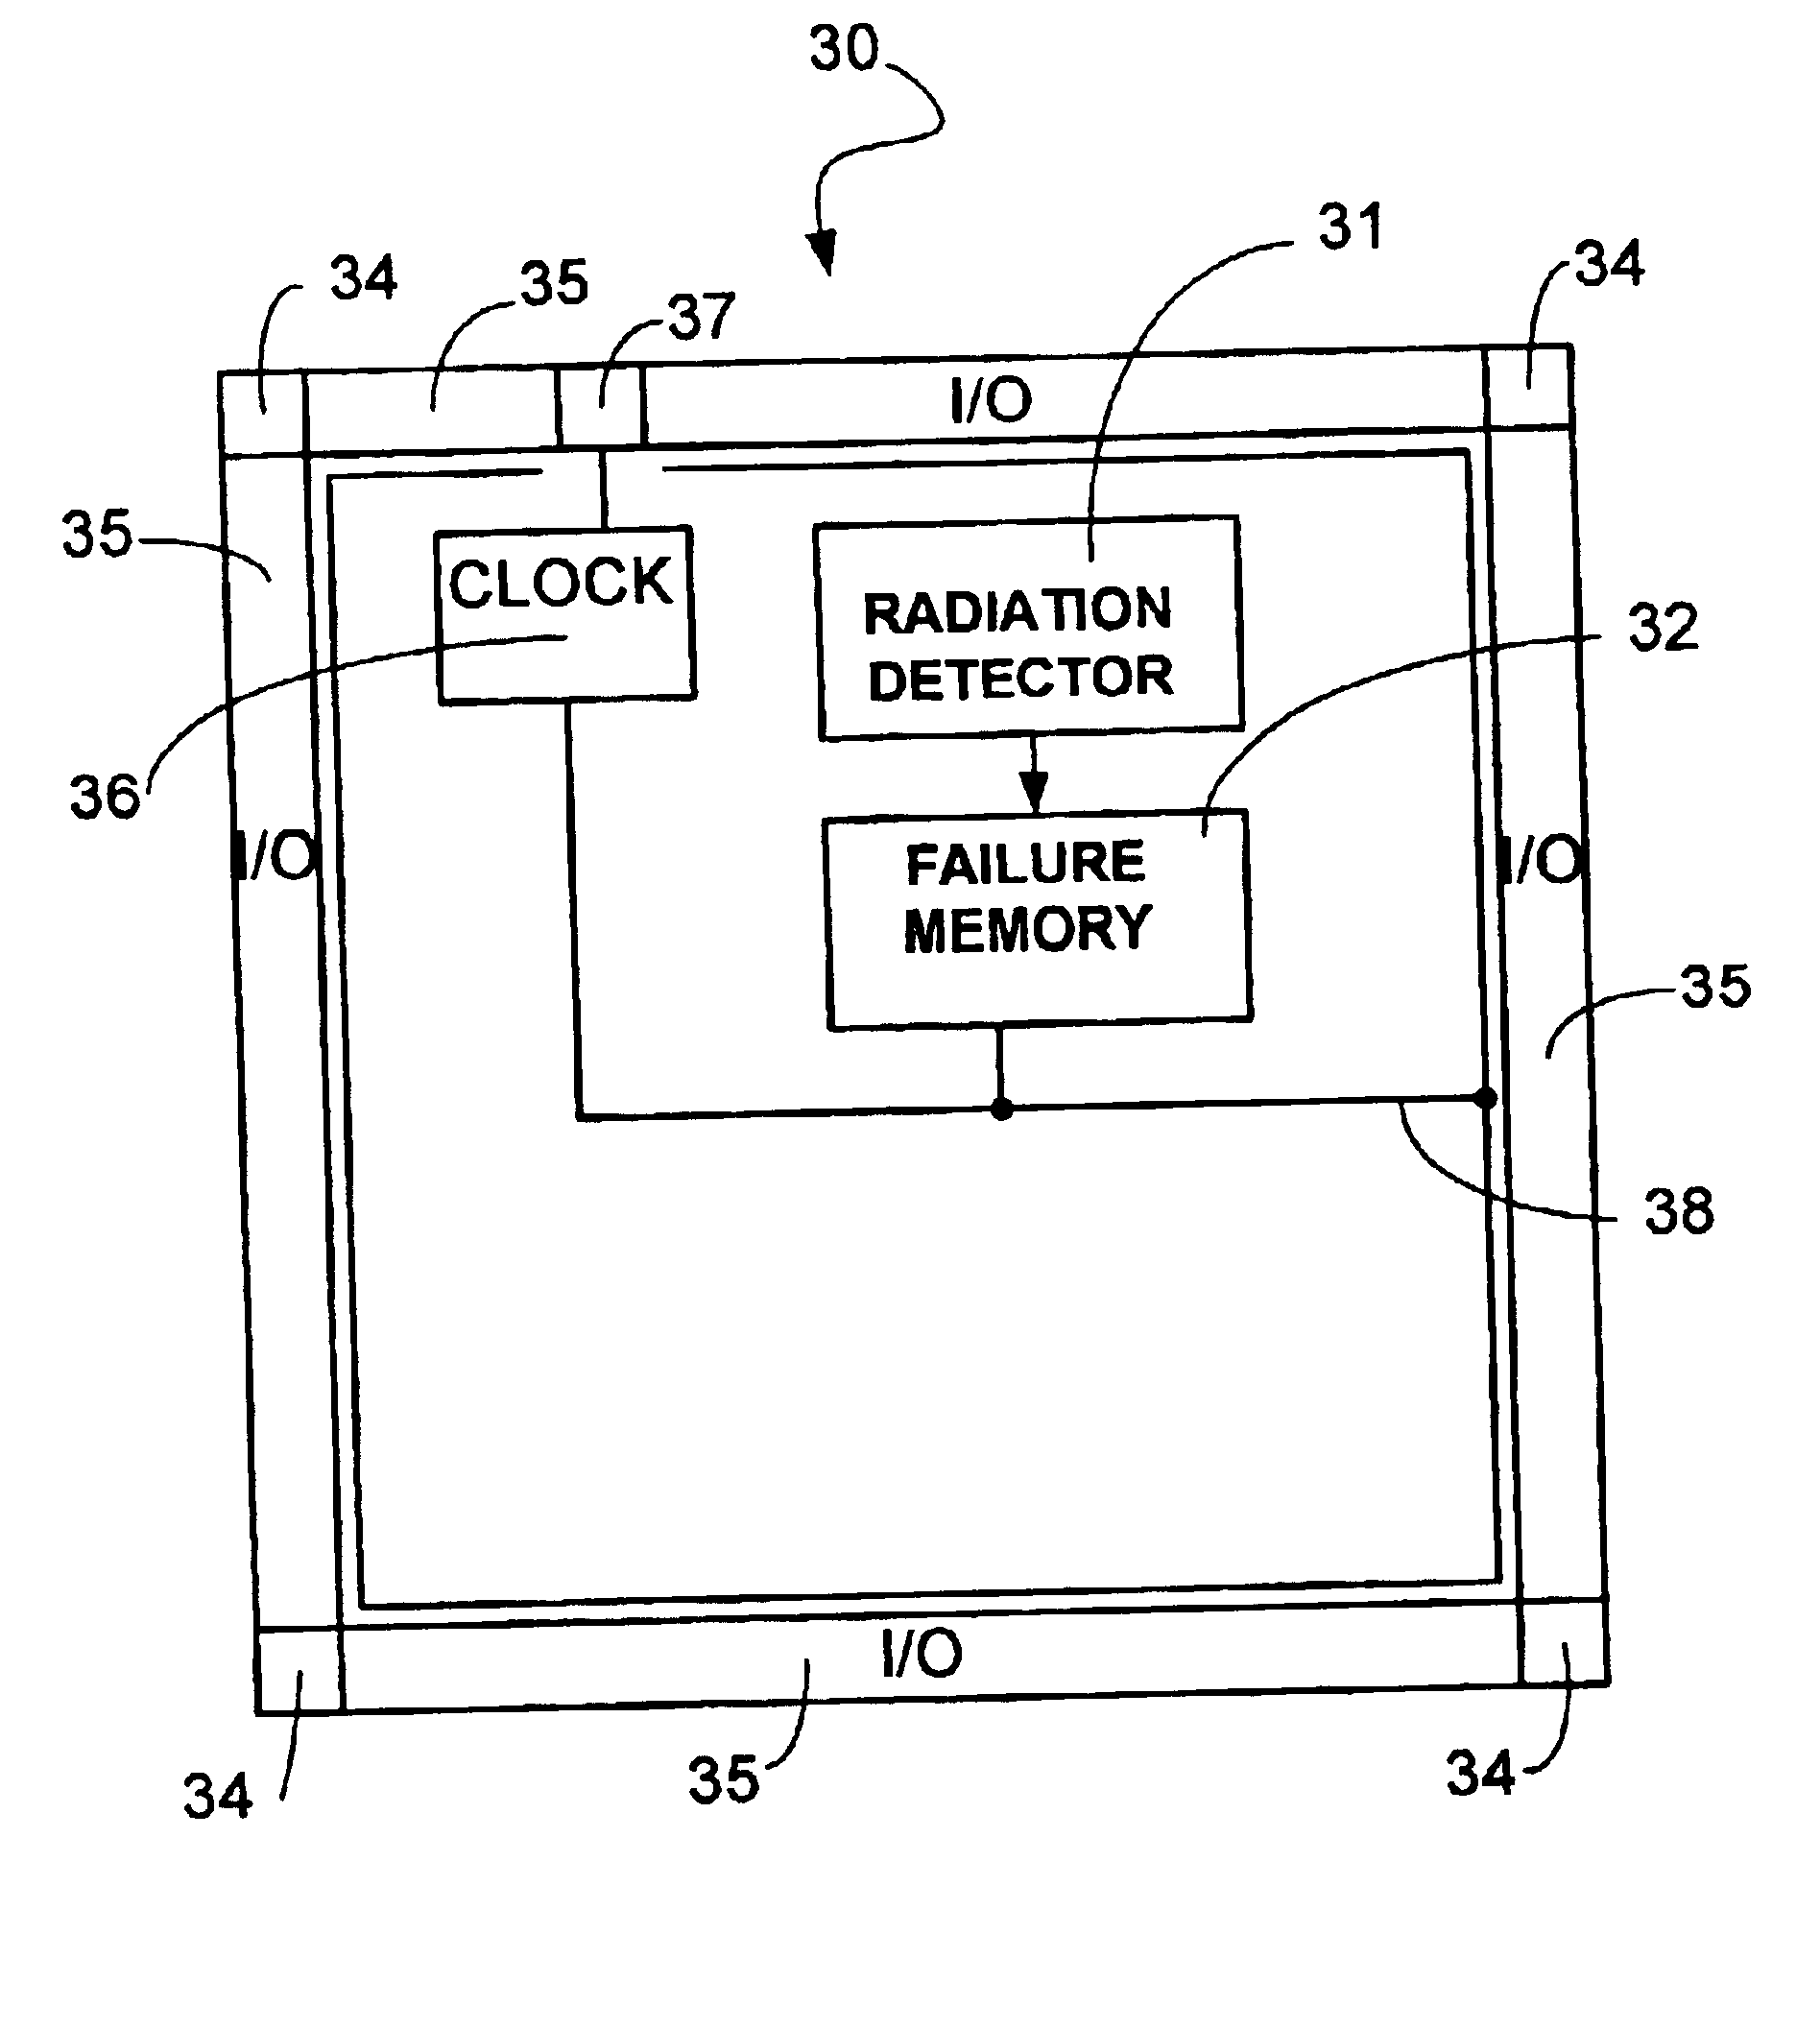 Method and apparatus to make a semiconductor chip susceptible to radiation failure